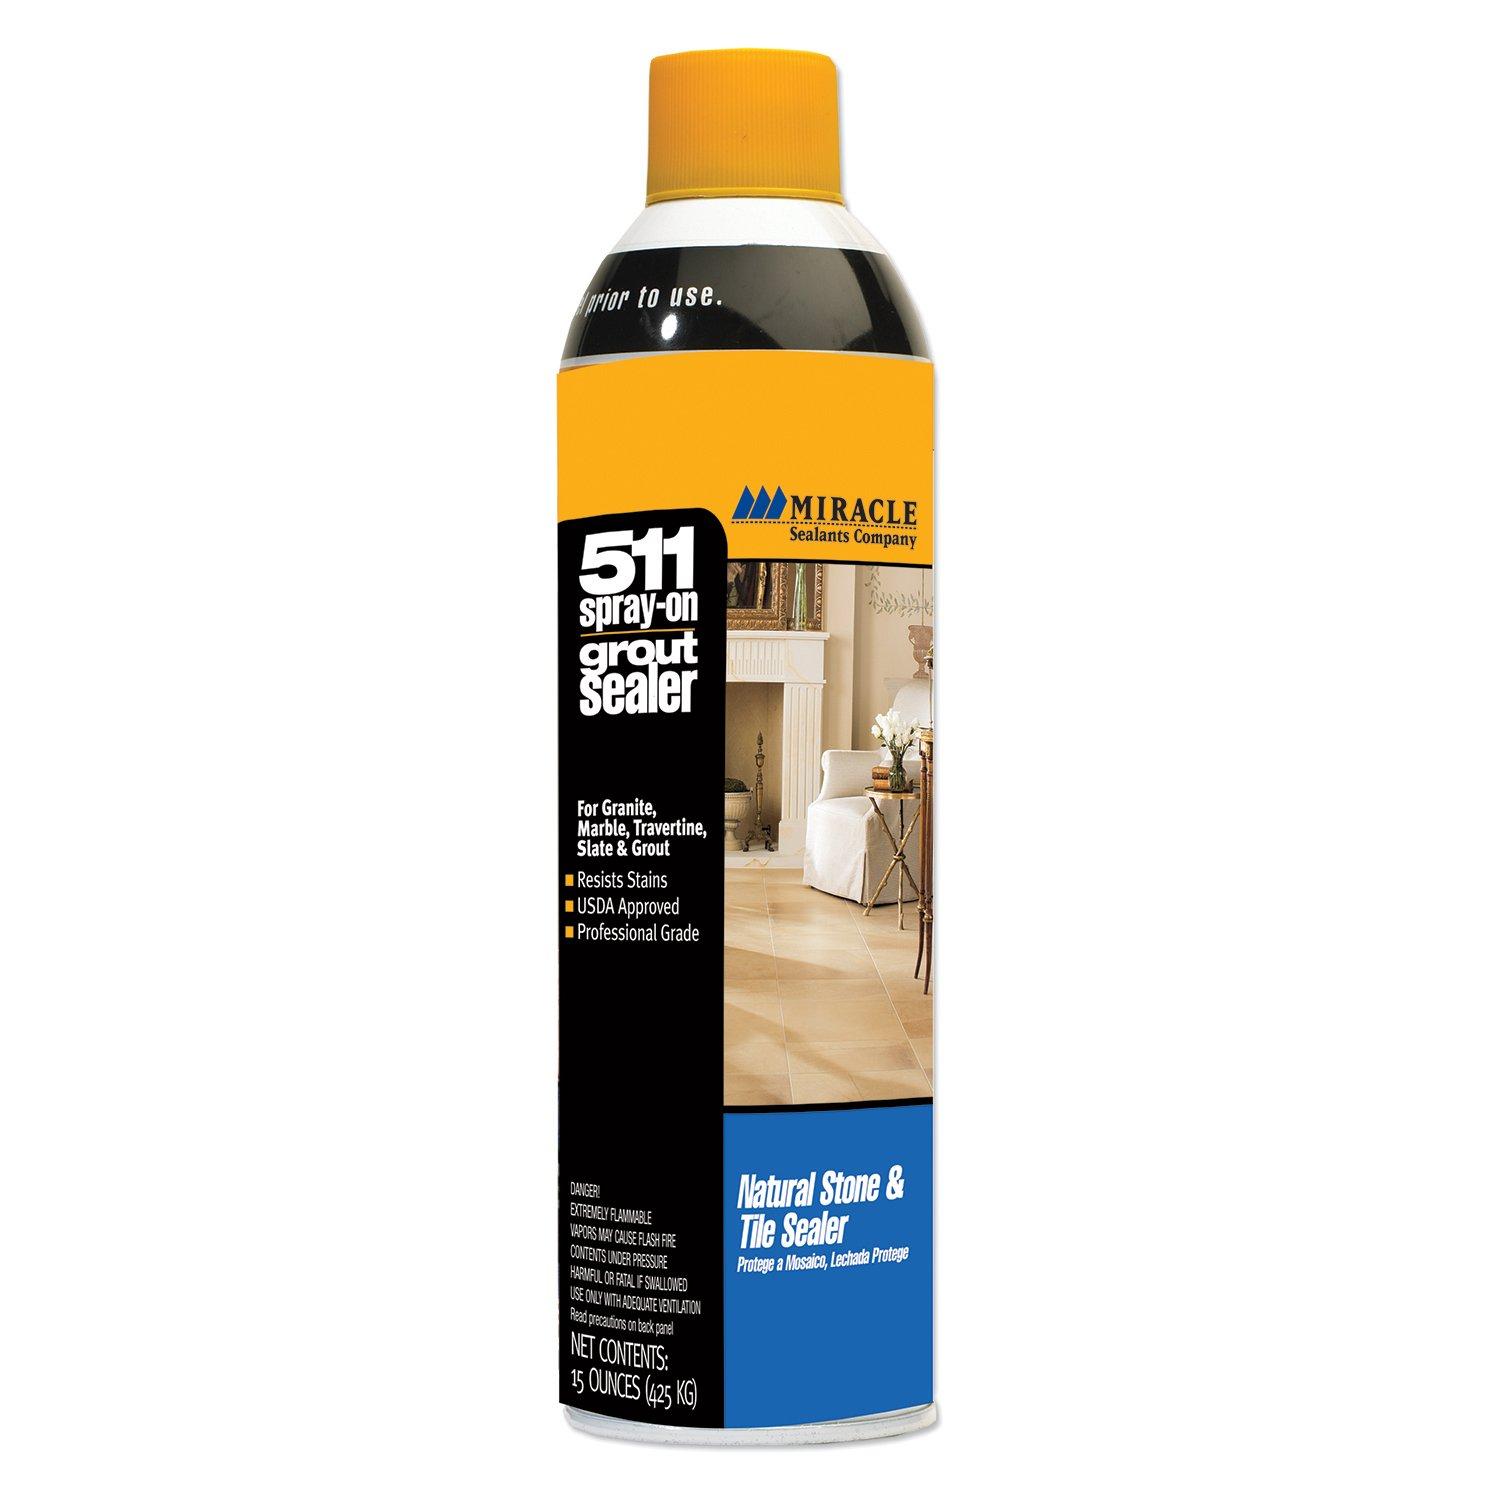 Miracle 511 Spray-on Grout Sealer